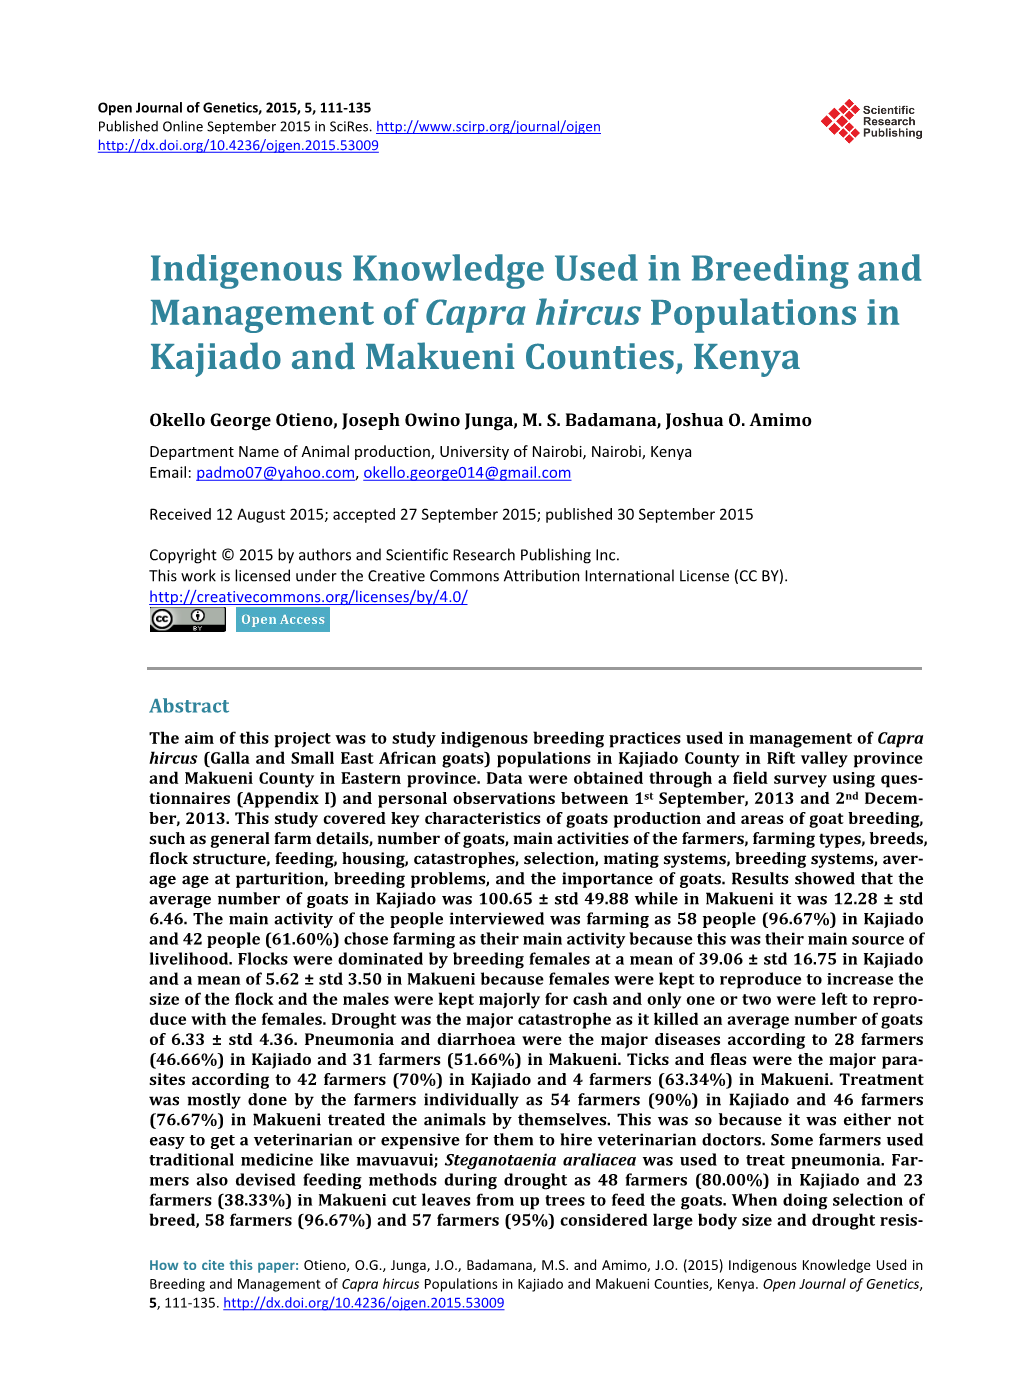 Indigenous Knowledge Used in Breeding and Management of Capra Hircus Populations in Kajiado and Makueni Counties, Kenya